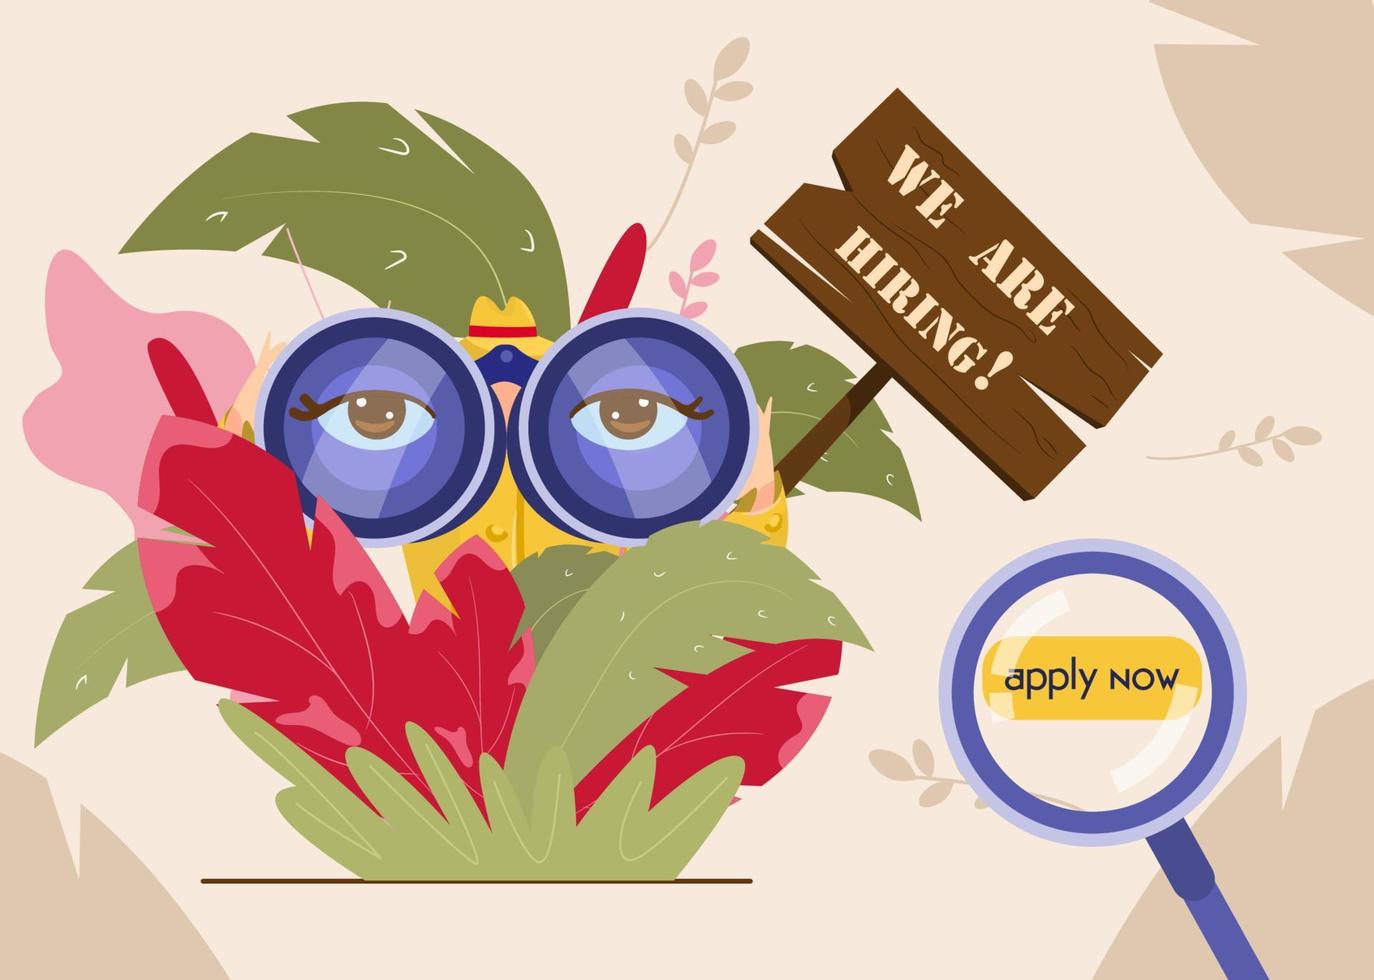 Web page template for recruitment agency. We are hiring concept. Woman detective looking through binoculars for new employees. Flat style. vector